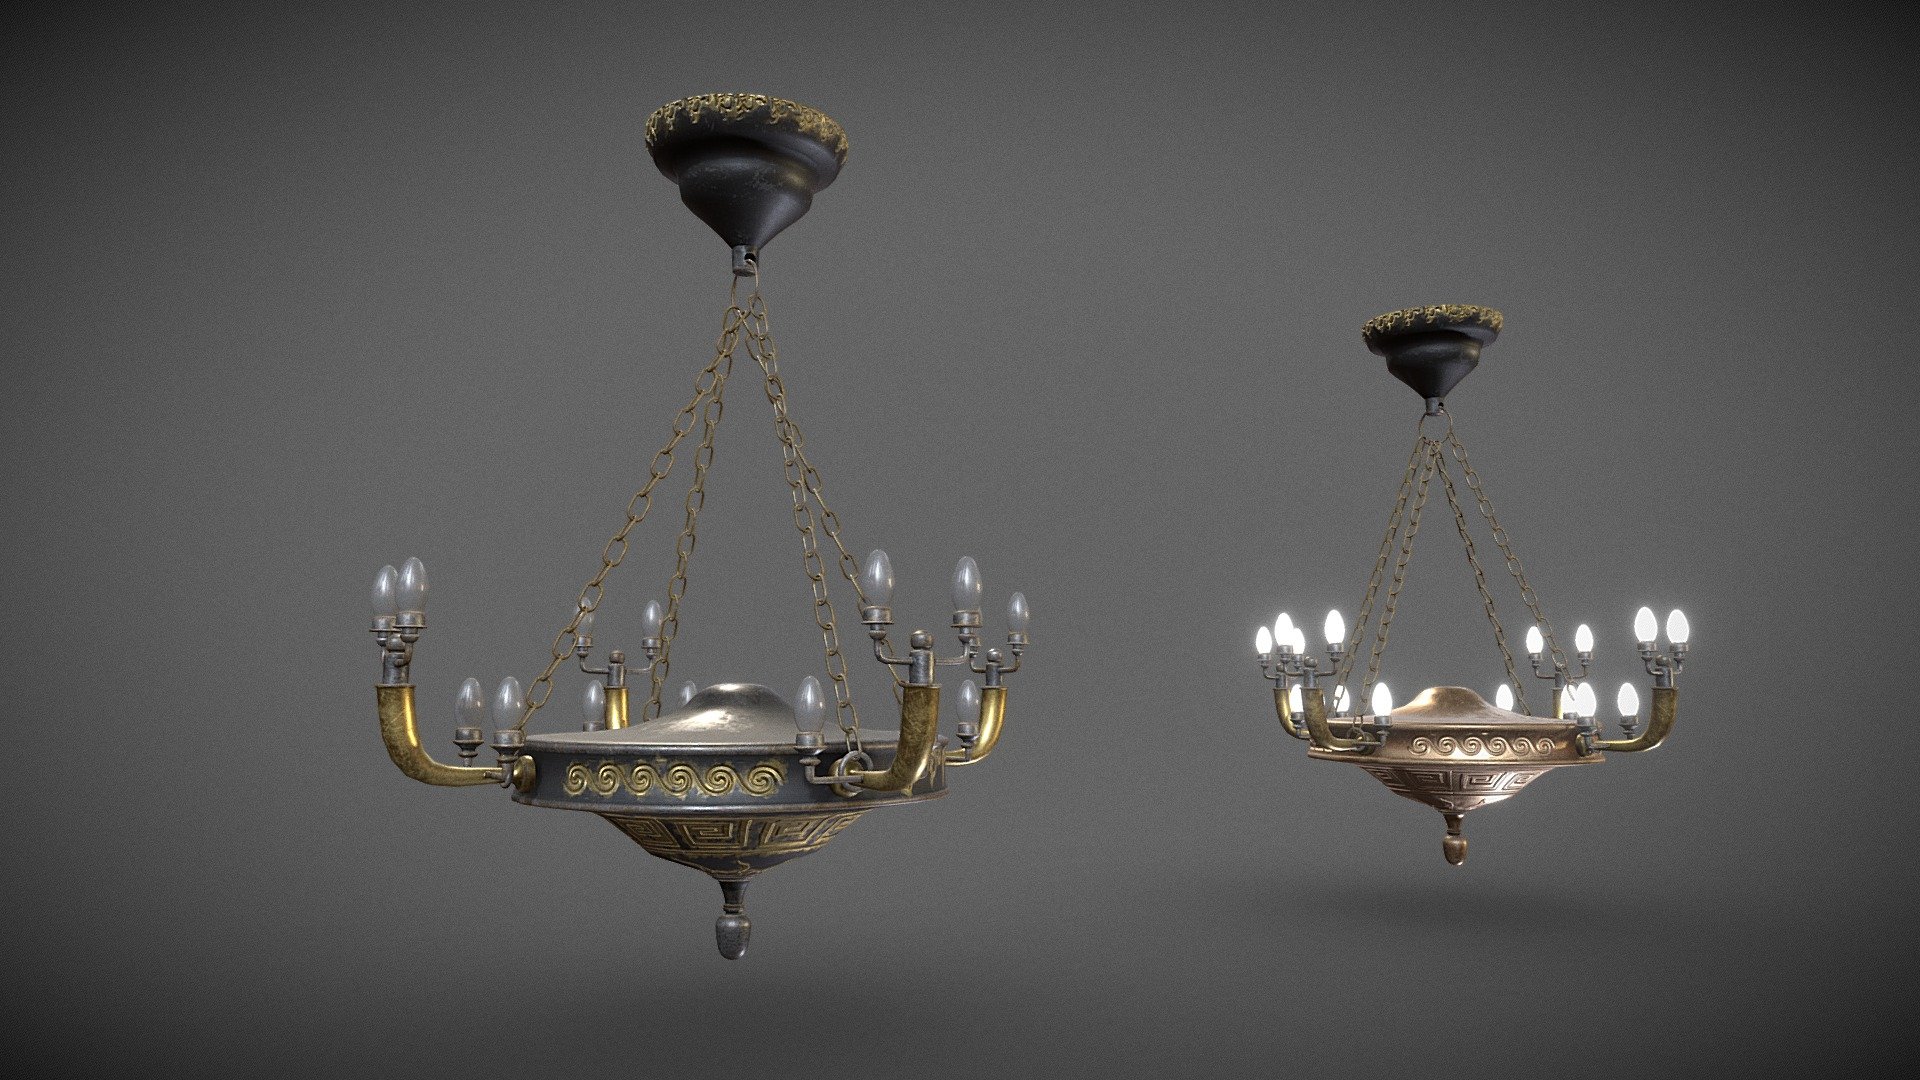 A couple of victorian style chandeliers, one is black and gold with light off, the other is bronze with lights on.   

You can also remove the lights if you want to exchange them for candles or just leave it empty.

PBR textures @4k 3d model